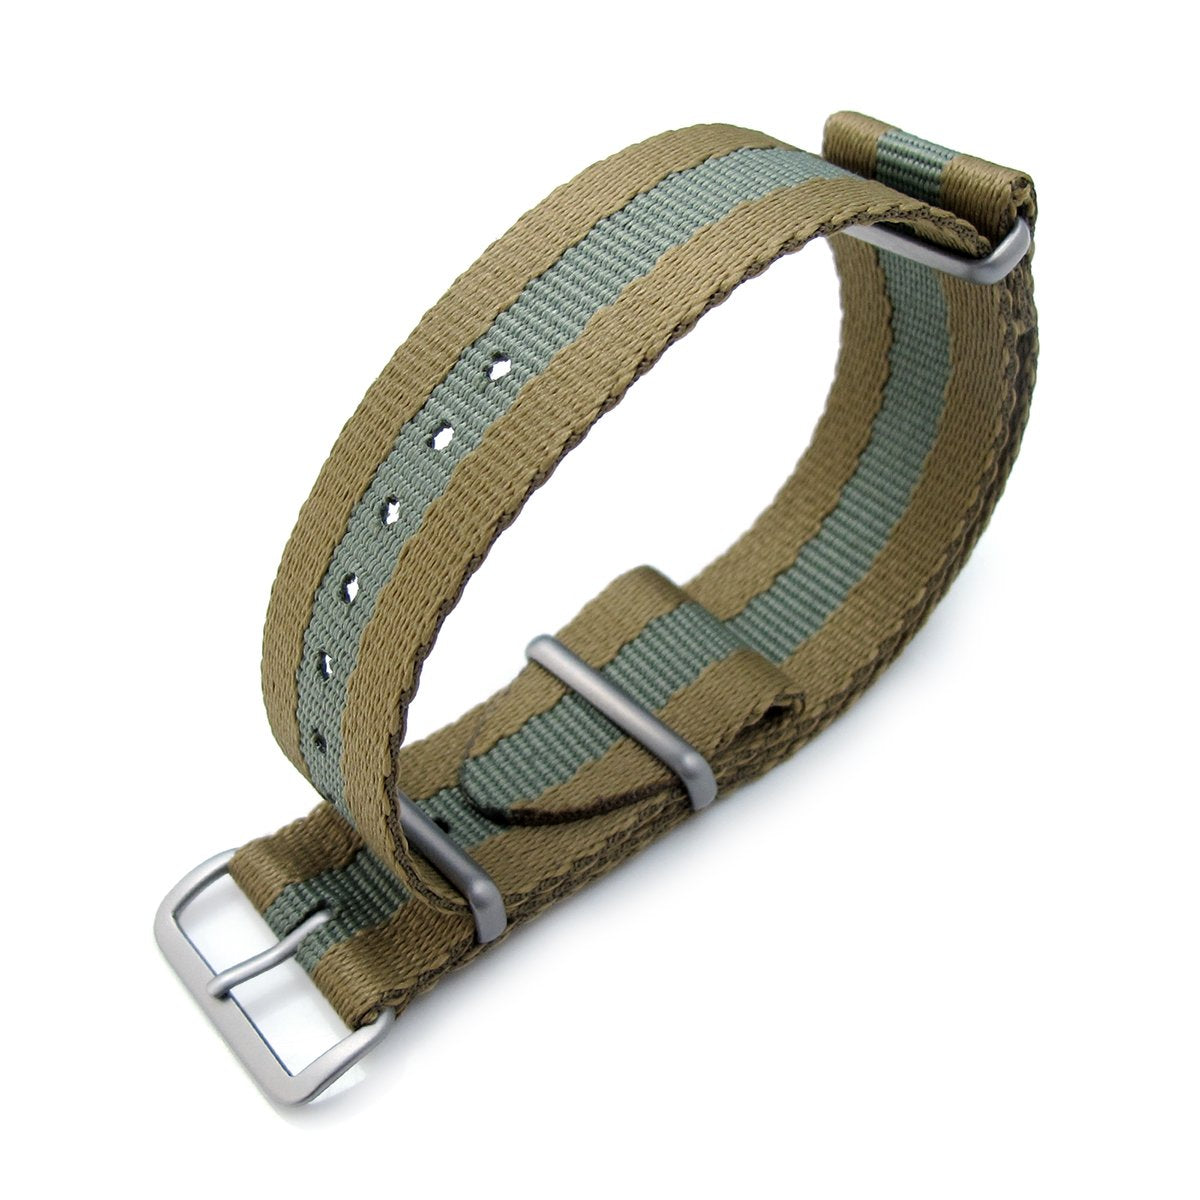 MiLTAT 20mm or 22mm G10 Military NATO Watch Strap Sandwich Nylon Armband Brushed Military Green Strapcode Watch Bands